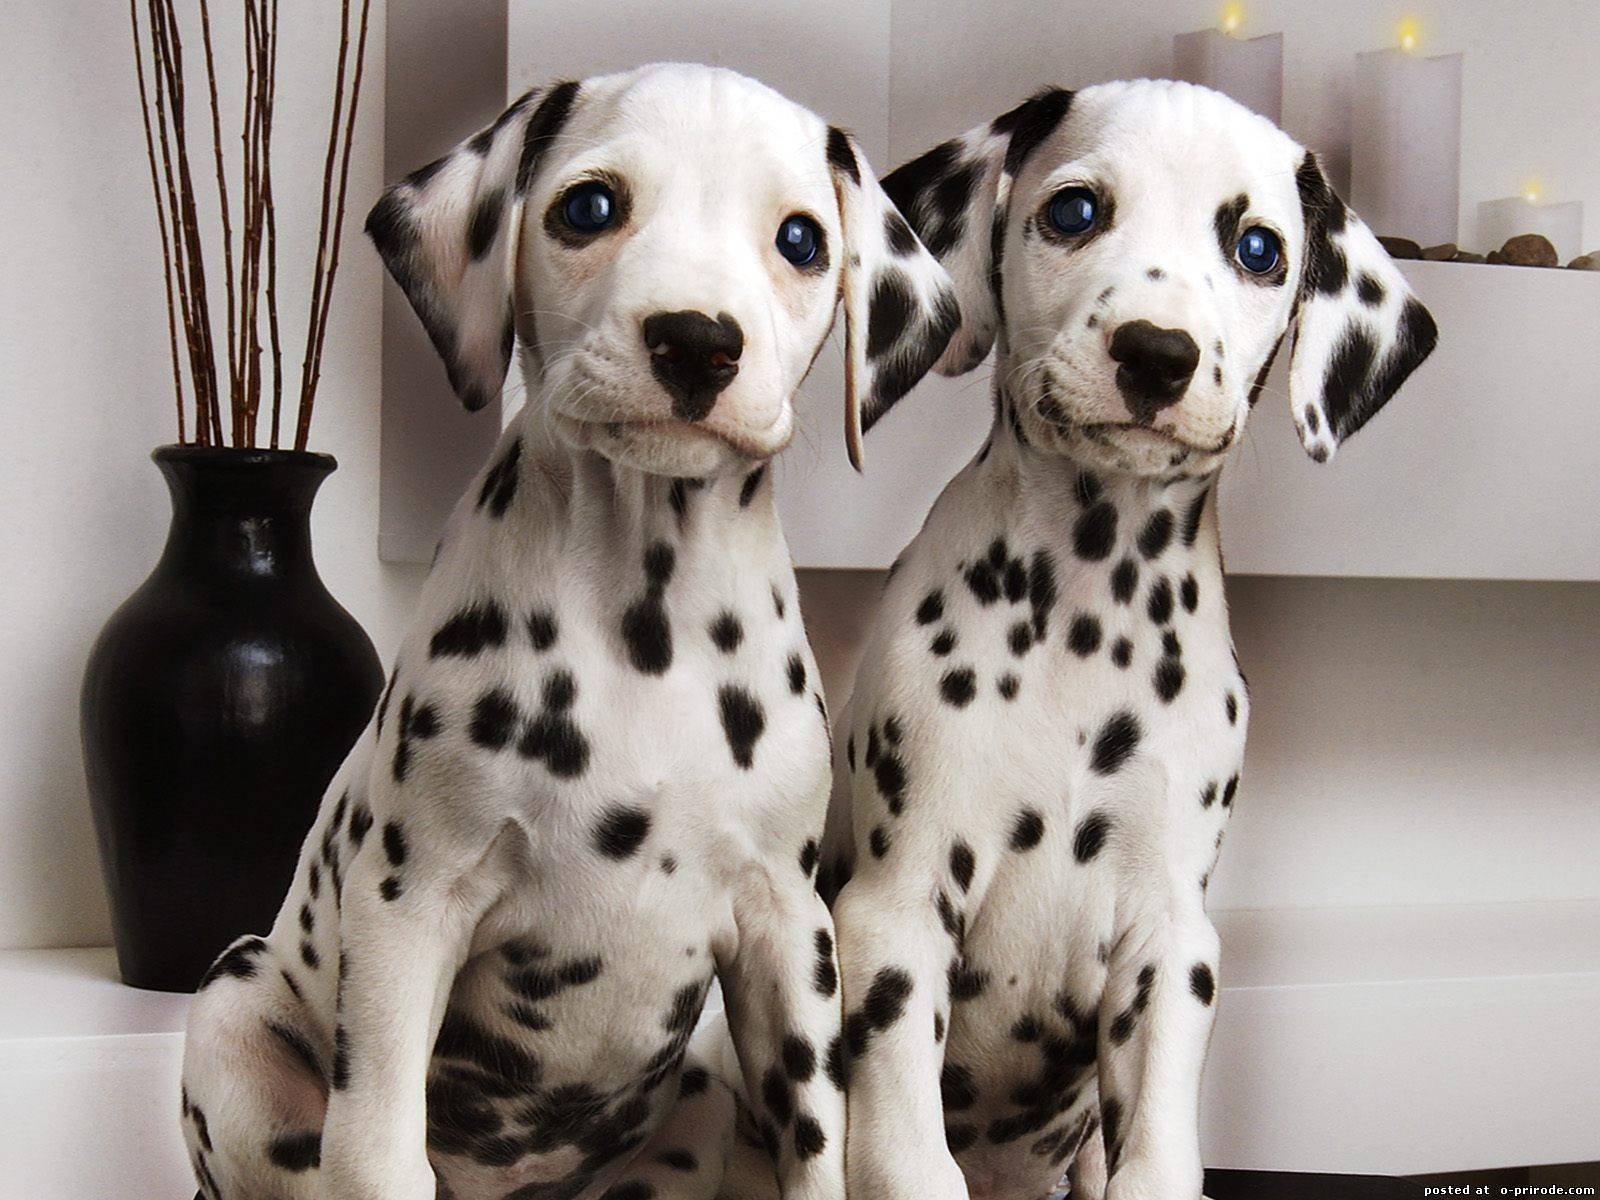 Cute Dalmatian Puppies wallpapers and images 